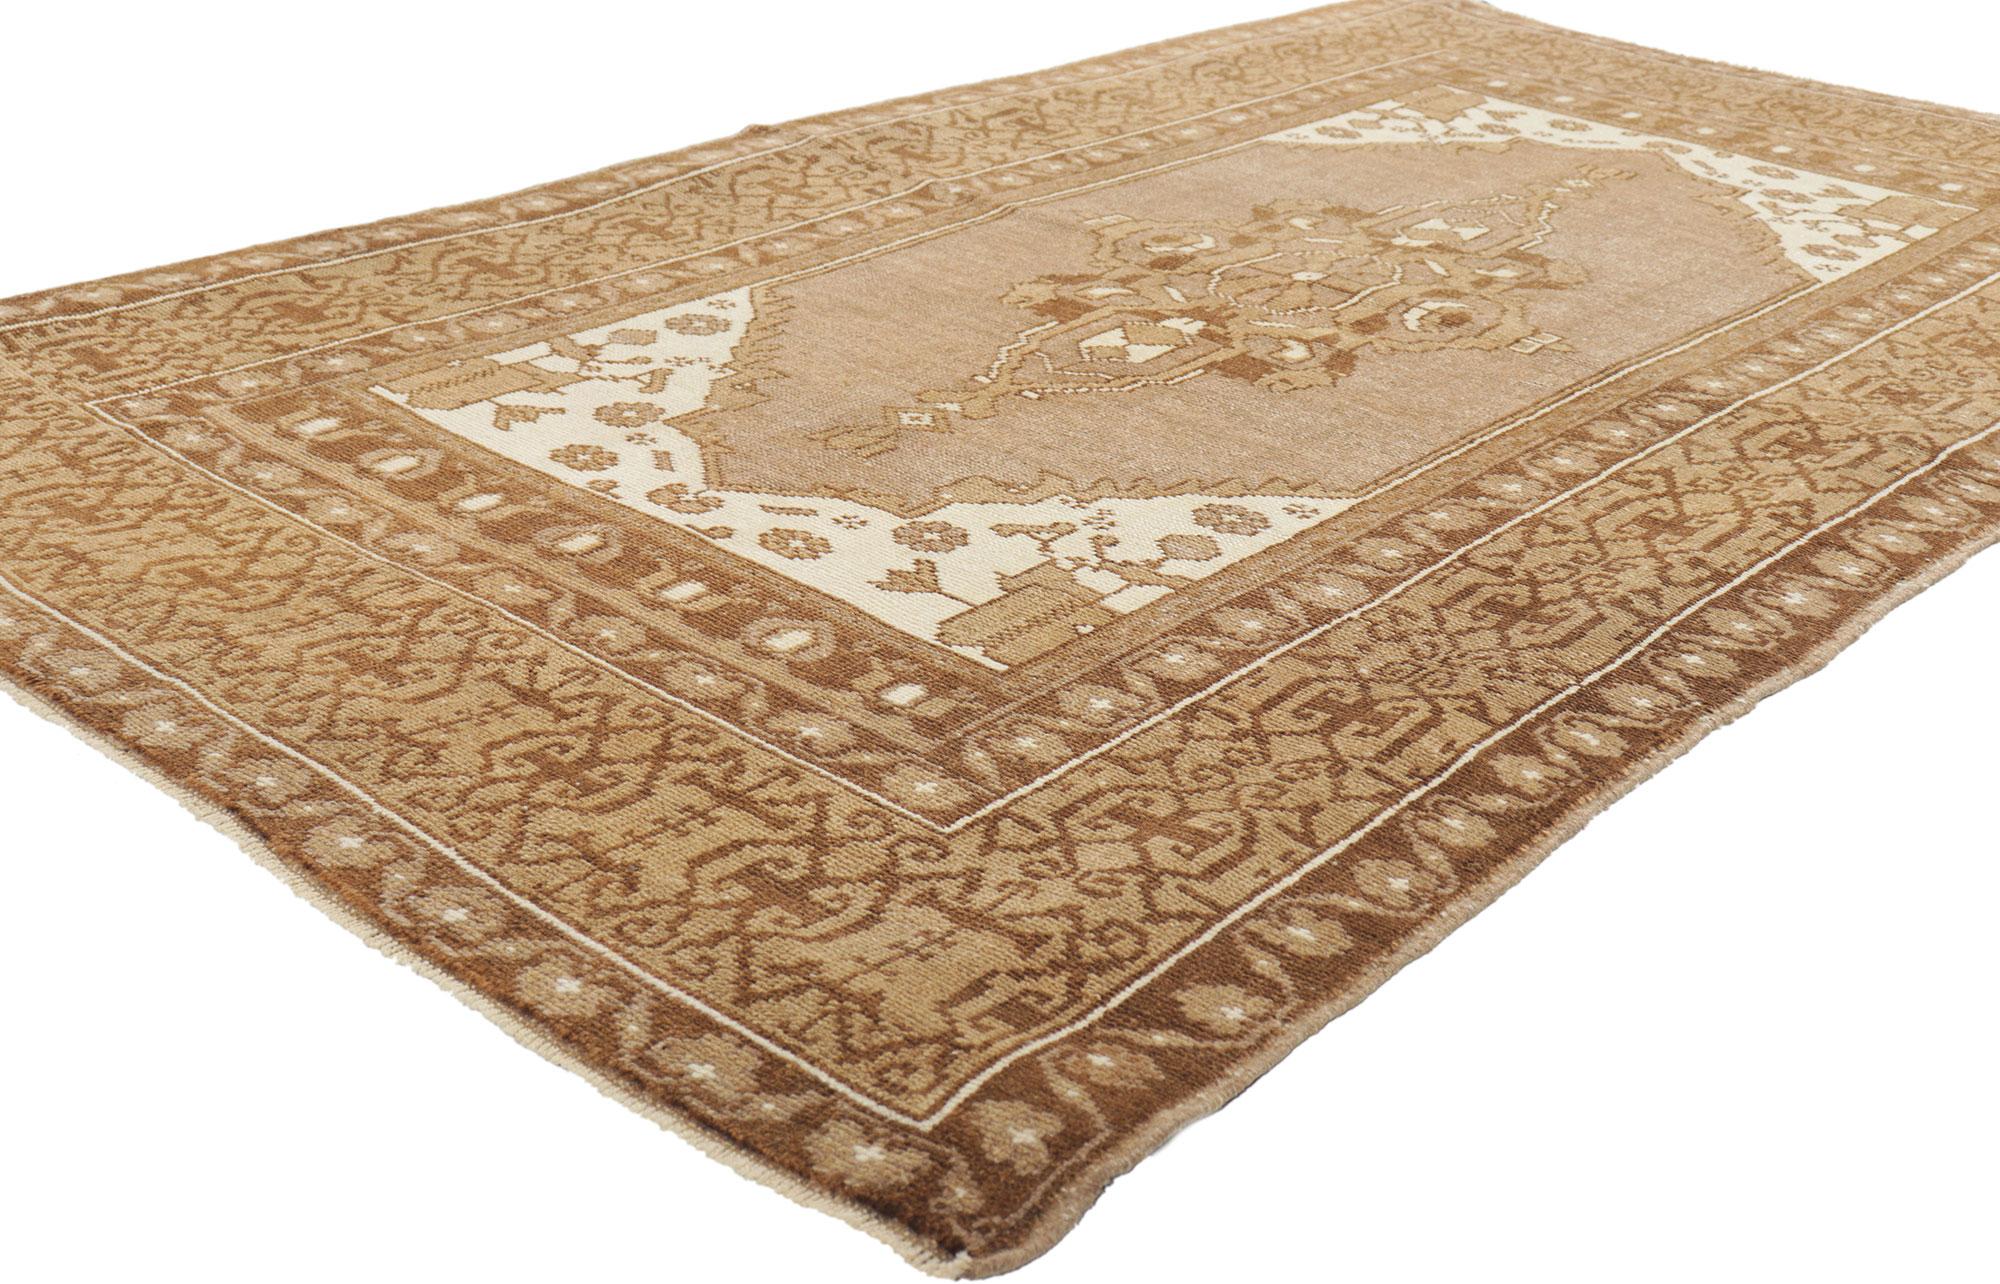 52958 Vintage Turkish Oushak Rug, 03'11 x 06'11.
Effortless beauty and simplicity meet soft, bespoke vibes with a modern style in this hand knotted wool vintage Turkish Oushak rug. The taupe antique washed cut-out field features an elongated